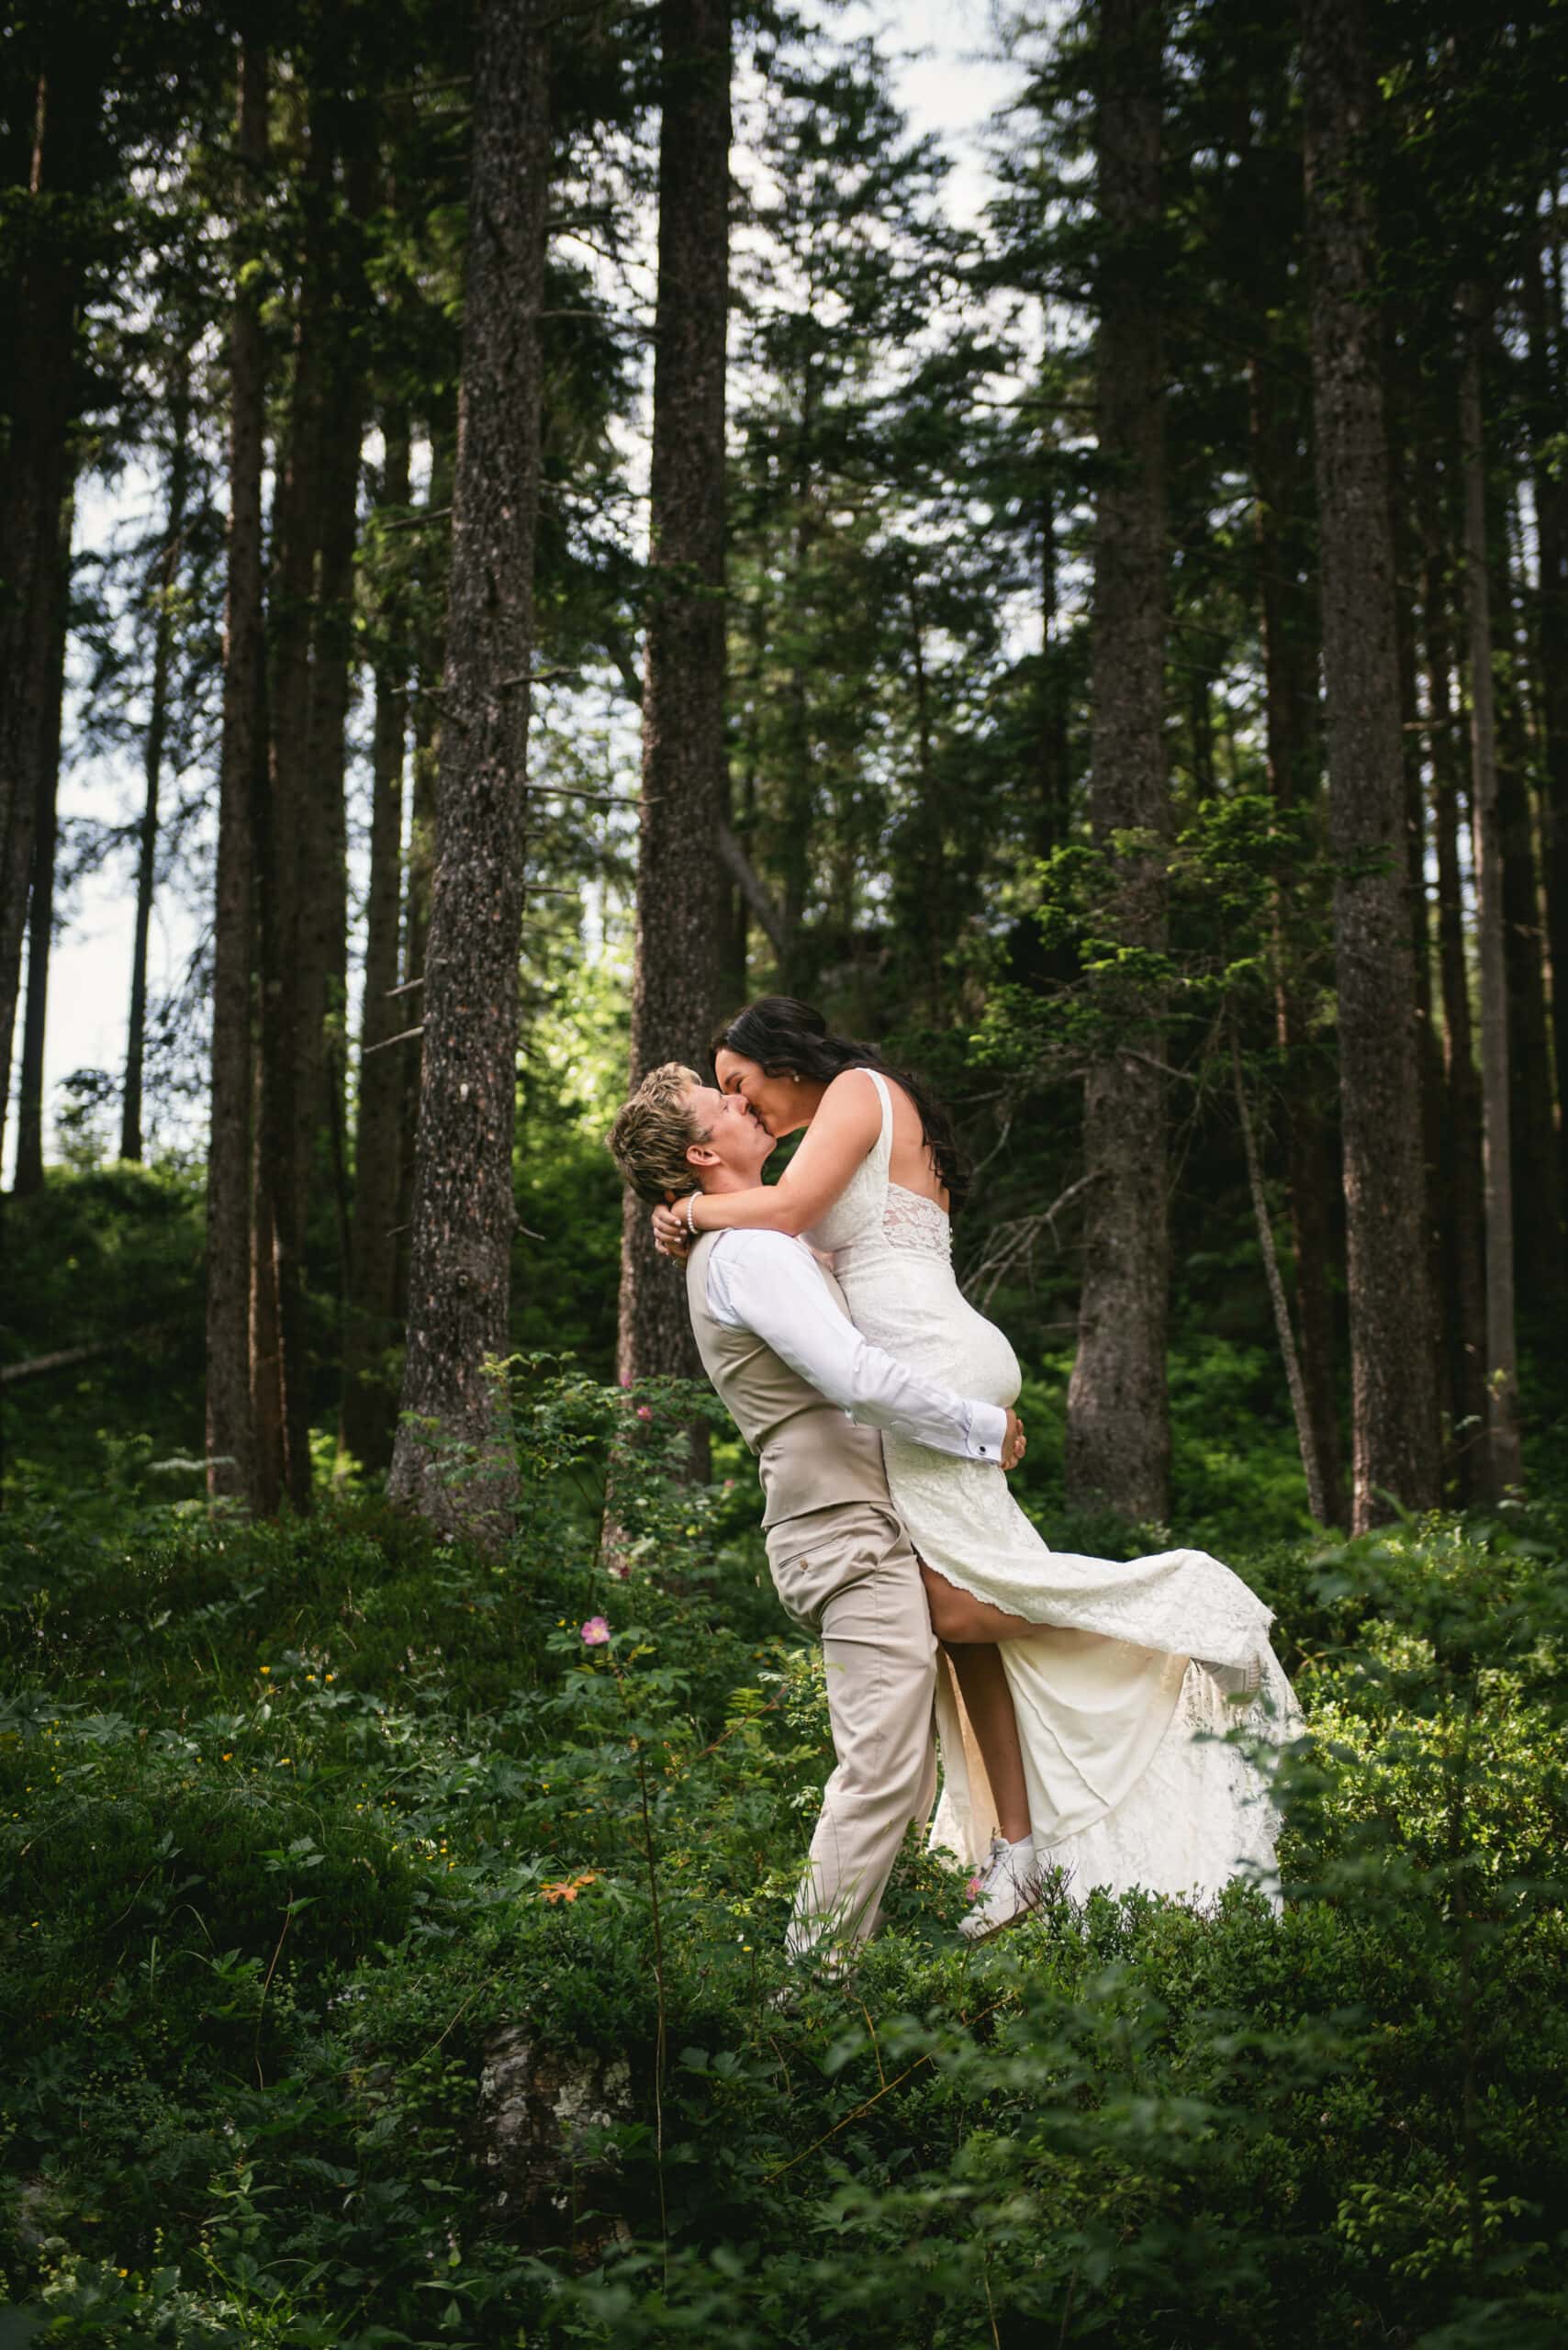 Peaks and passion united - a captivating hiking elopement.